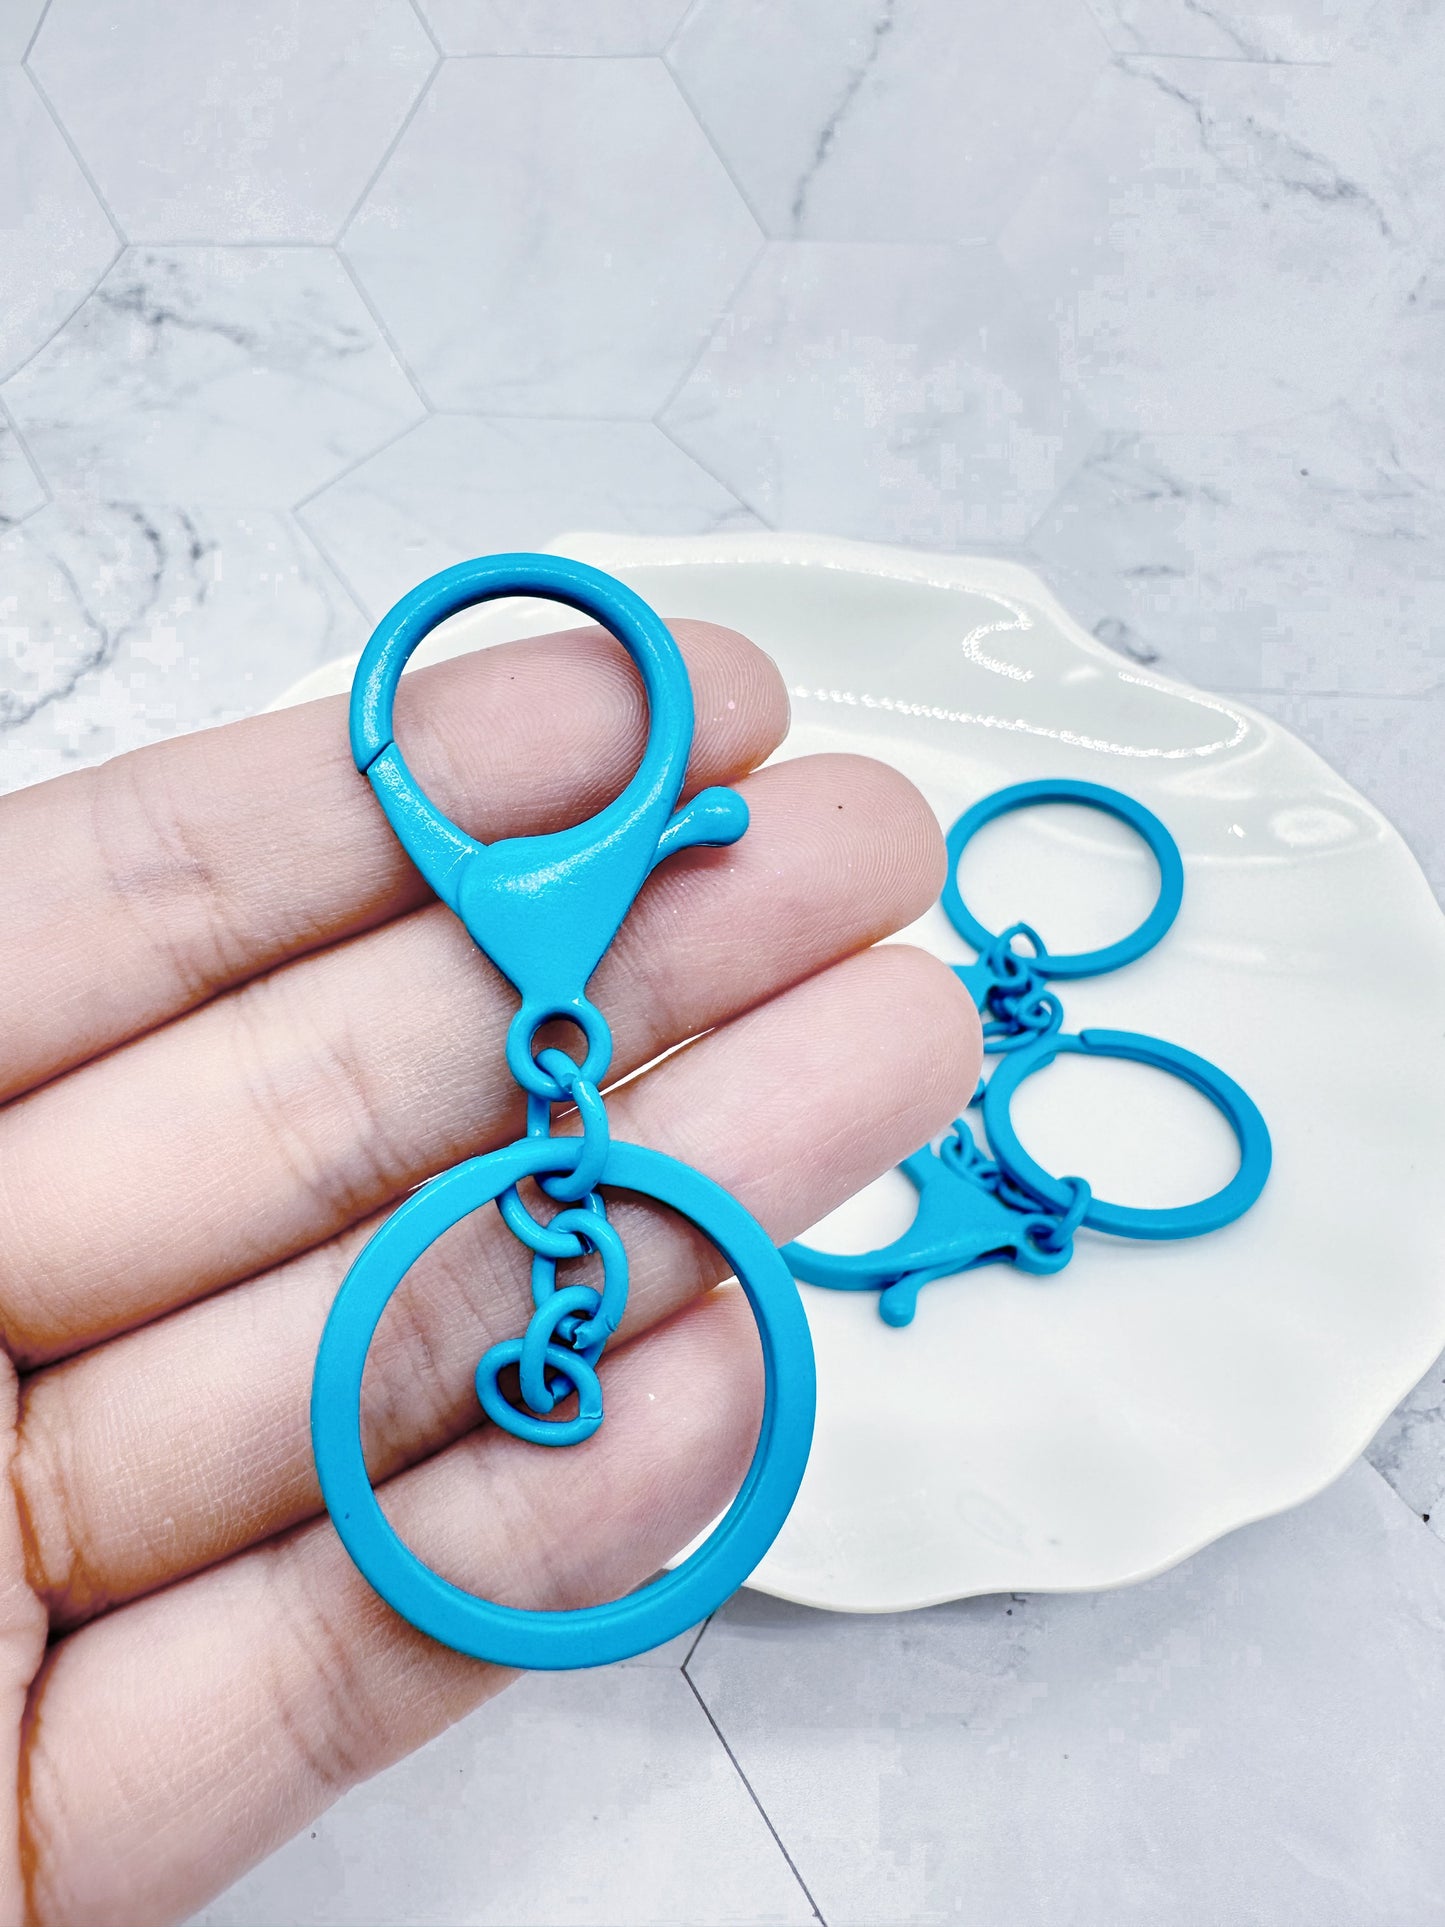 Blue Keychain Rings Lobster Clasp